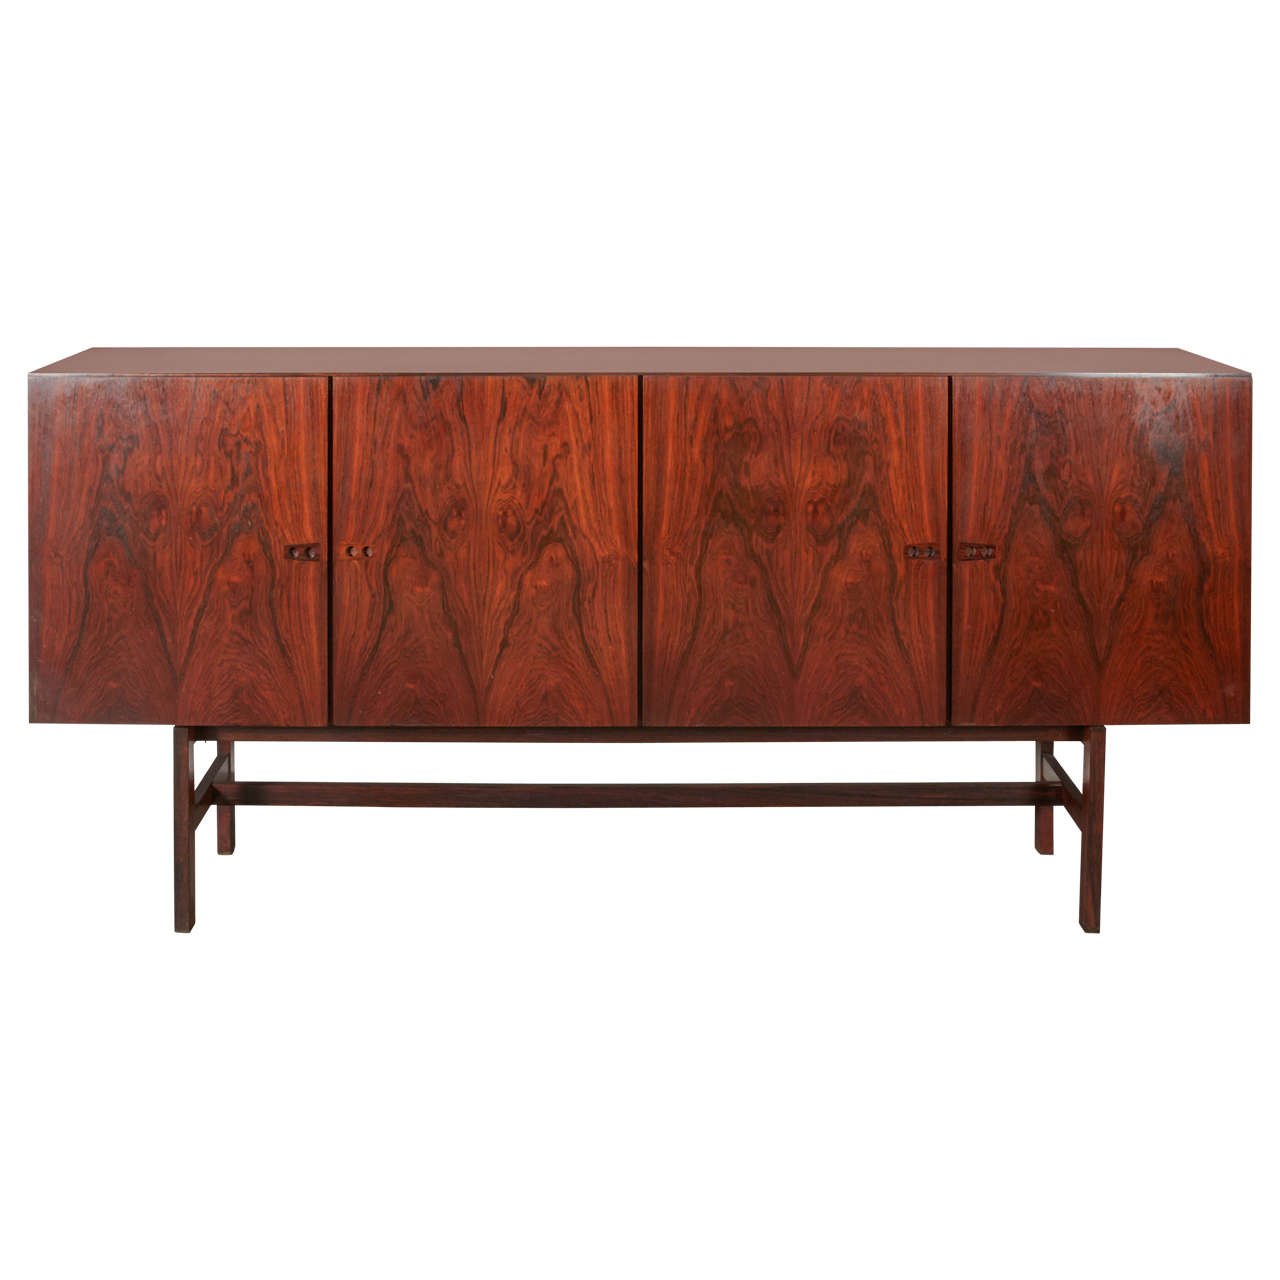 Kai Kristiansen Attributed Bookmatched Grain Rosewood Sideboard, Denmark 1960s